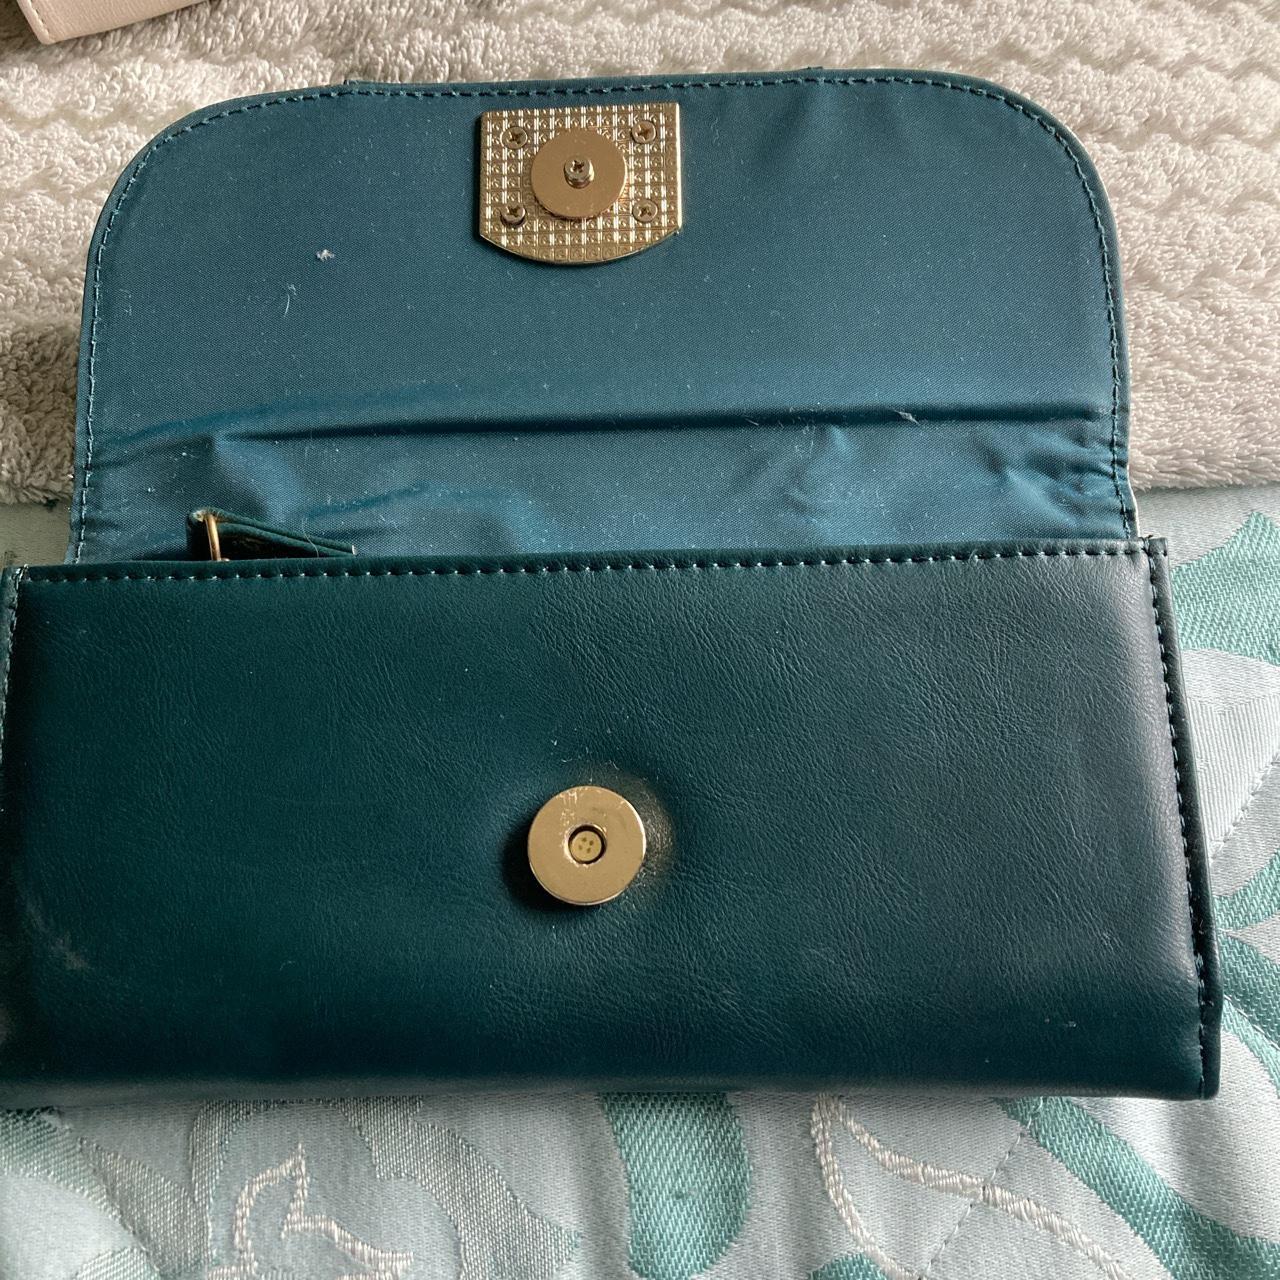 Gionni green purse with a lovely metallic design to... - Depop